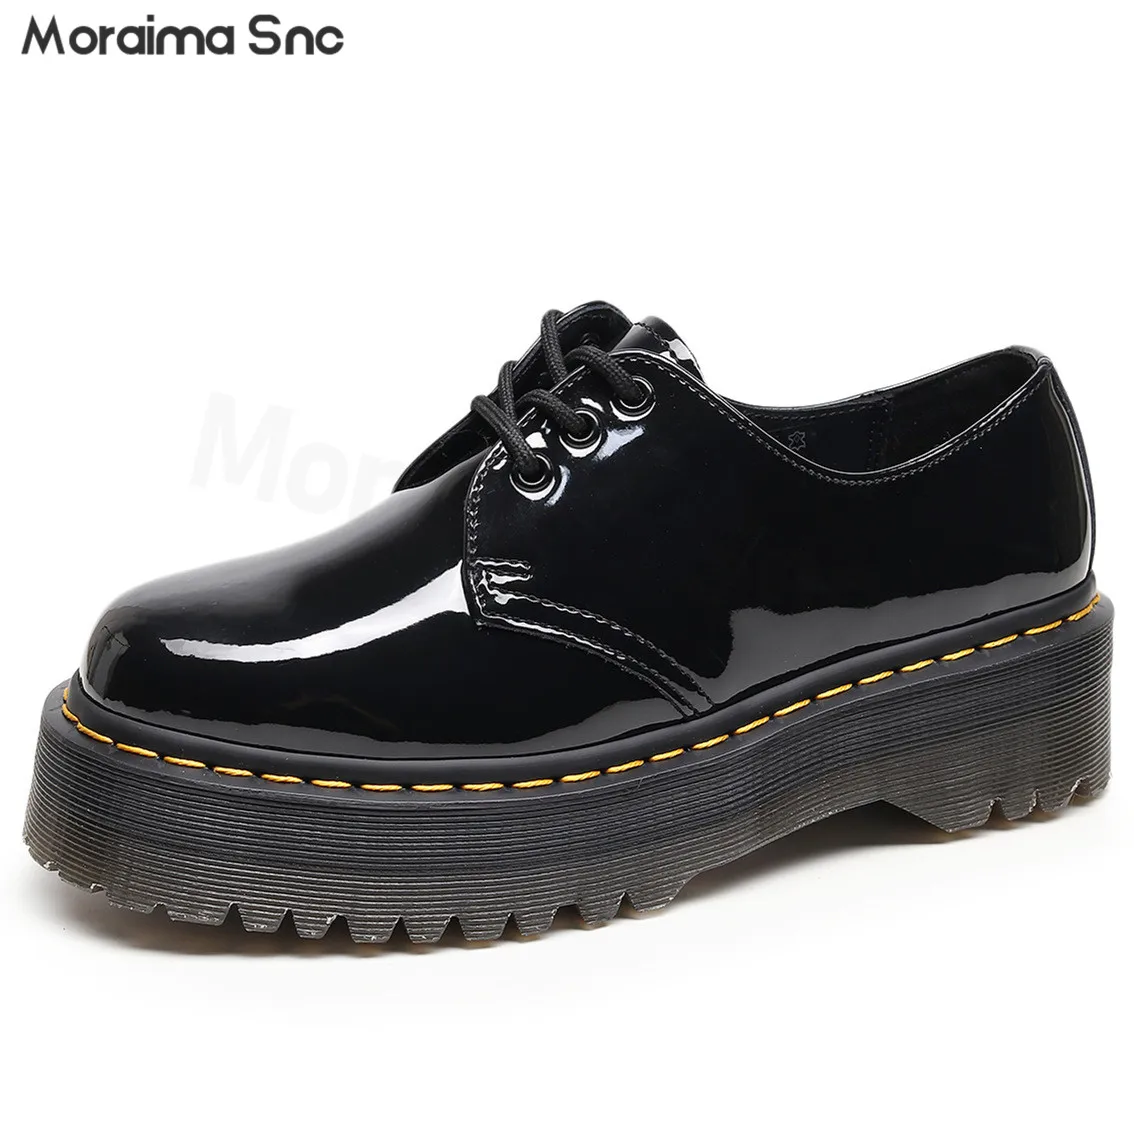 

Black Patent Leather Platform Leather Shoes Mirror Round Toe Low-Heeled Lace-Up Shoes Large Size Fashionable Casual Women's Shoe